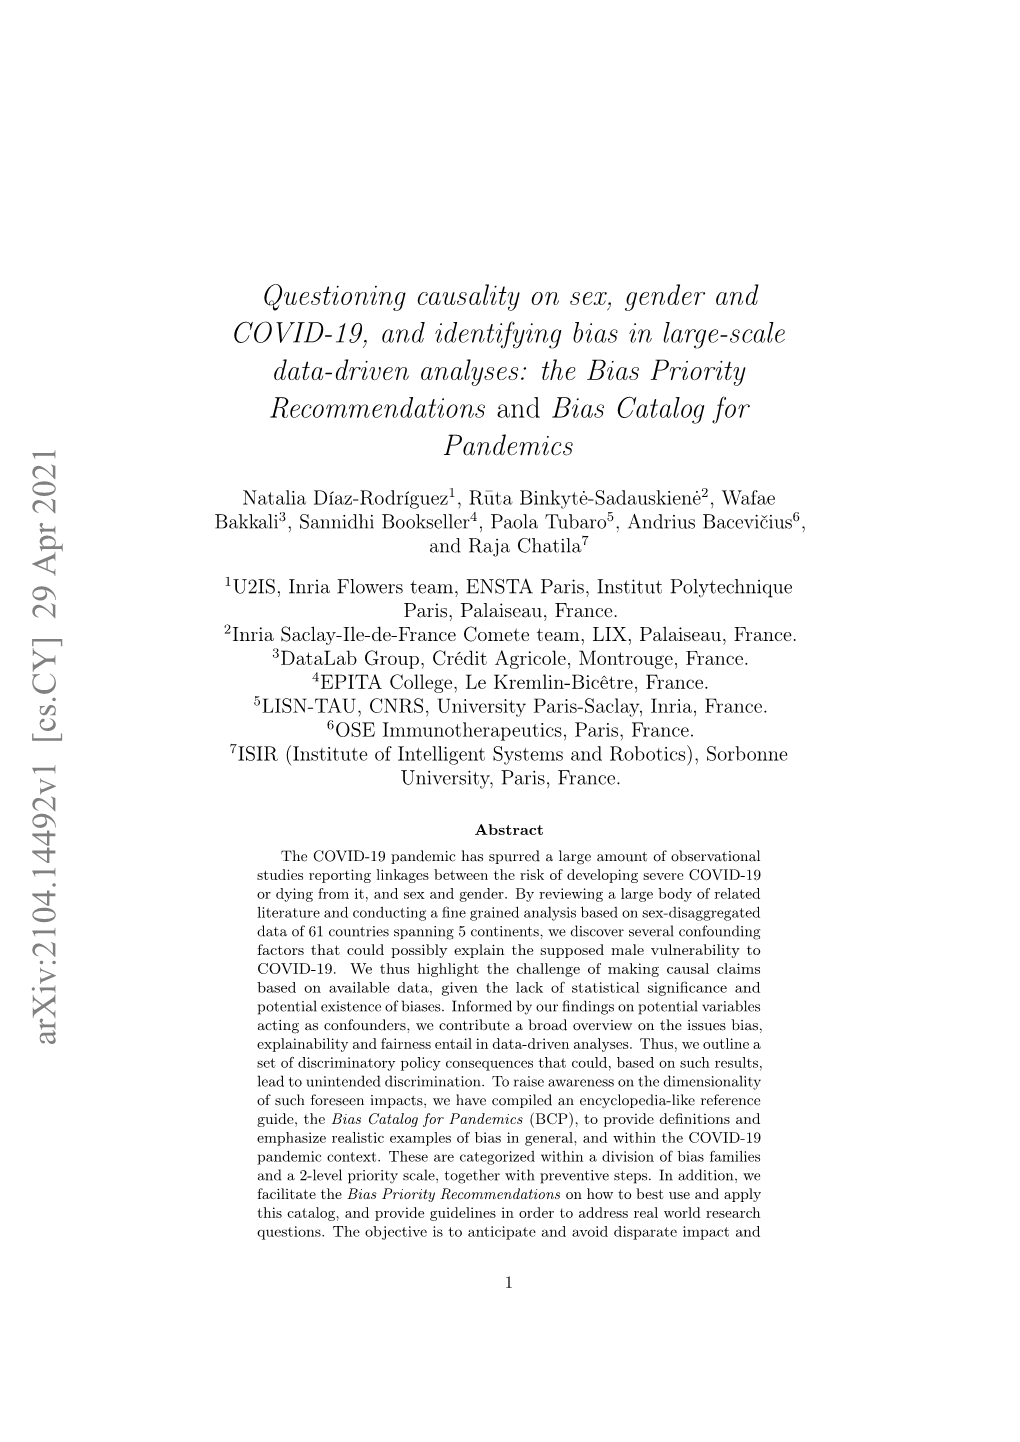 Questioning Causality on Sex, Gender and COVID-19, and Identifying Bias